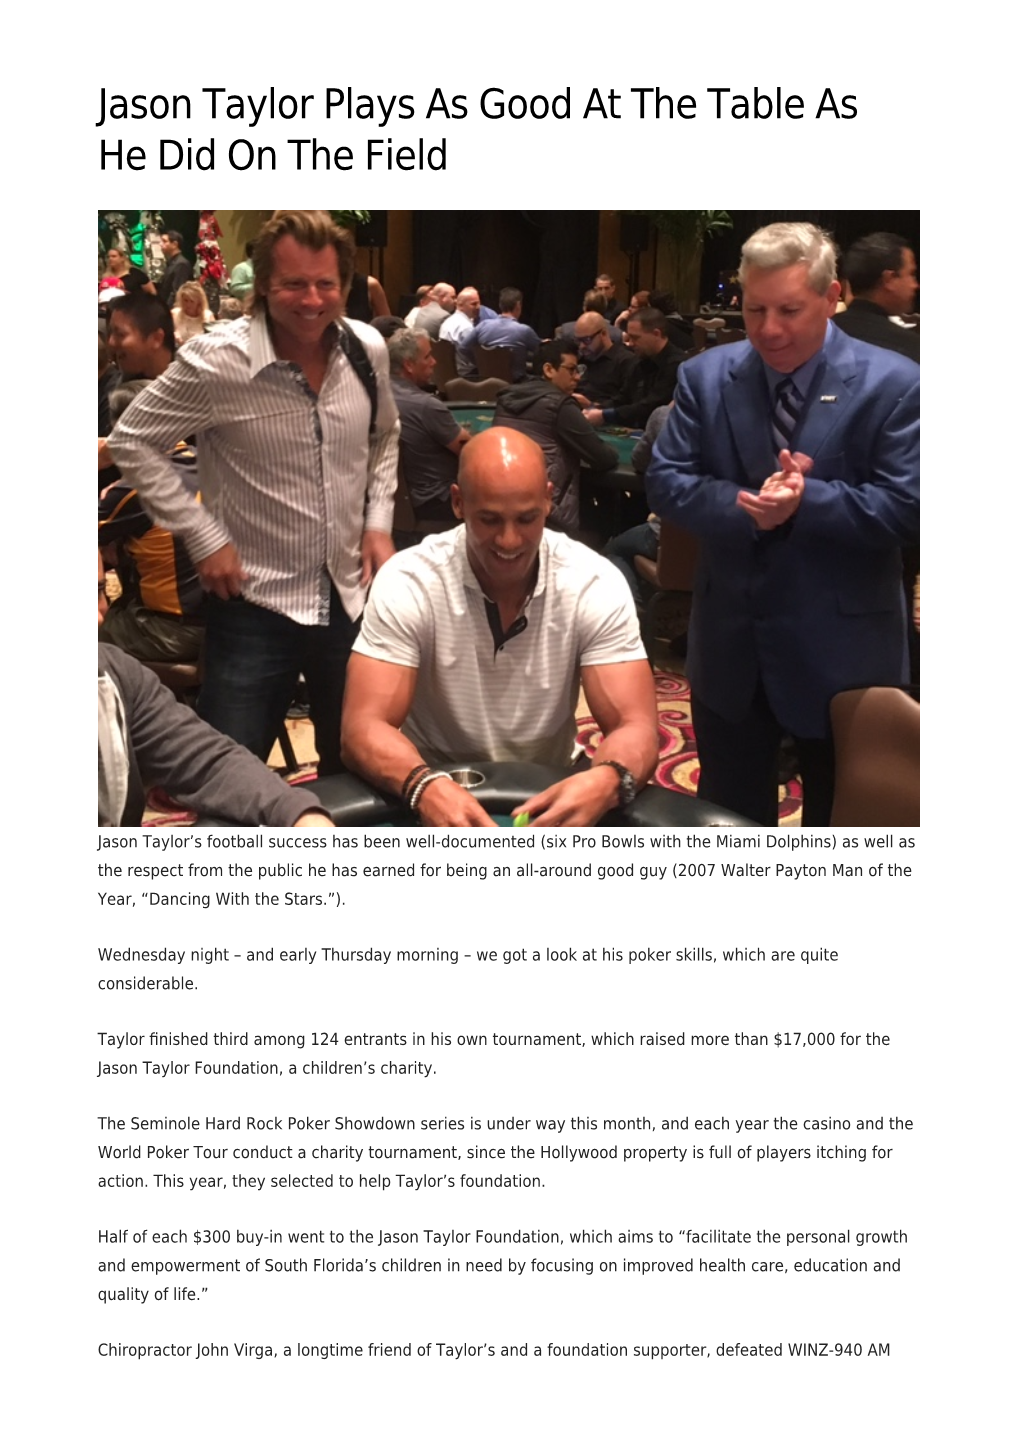 Jason Taylor Plays As Good at the Table As He Did on the Field